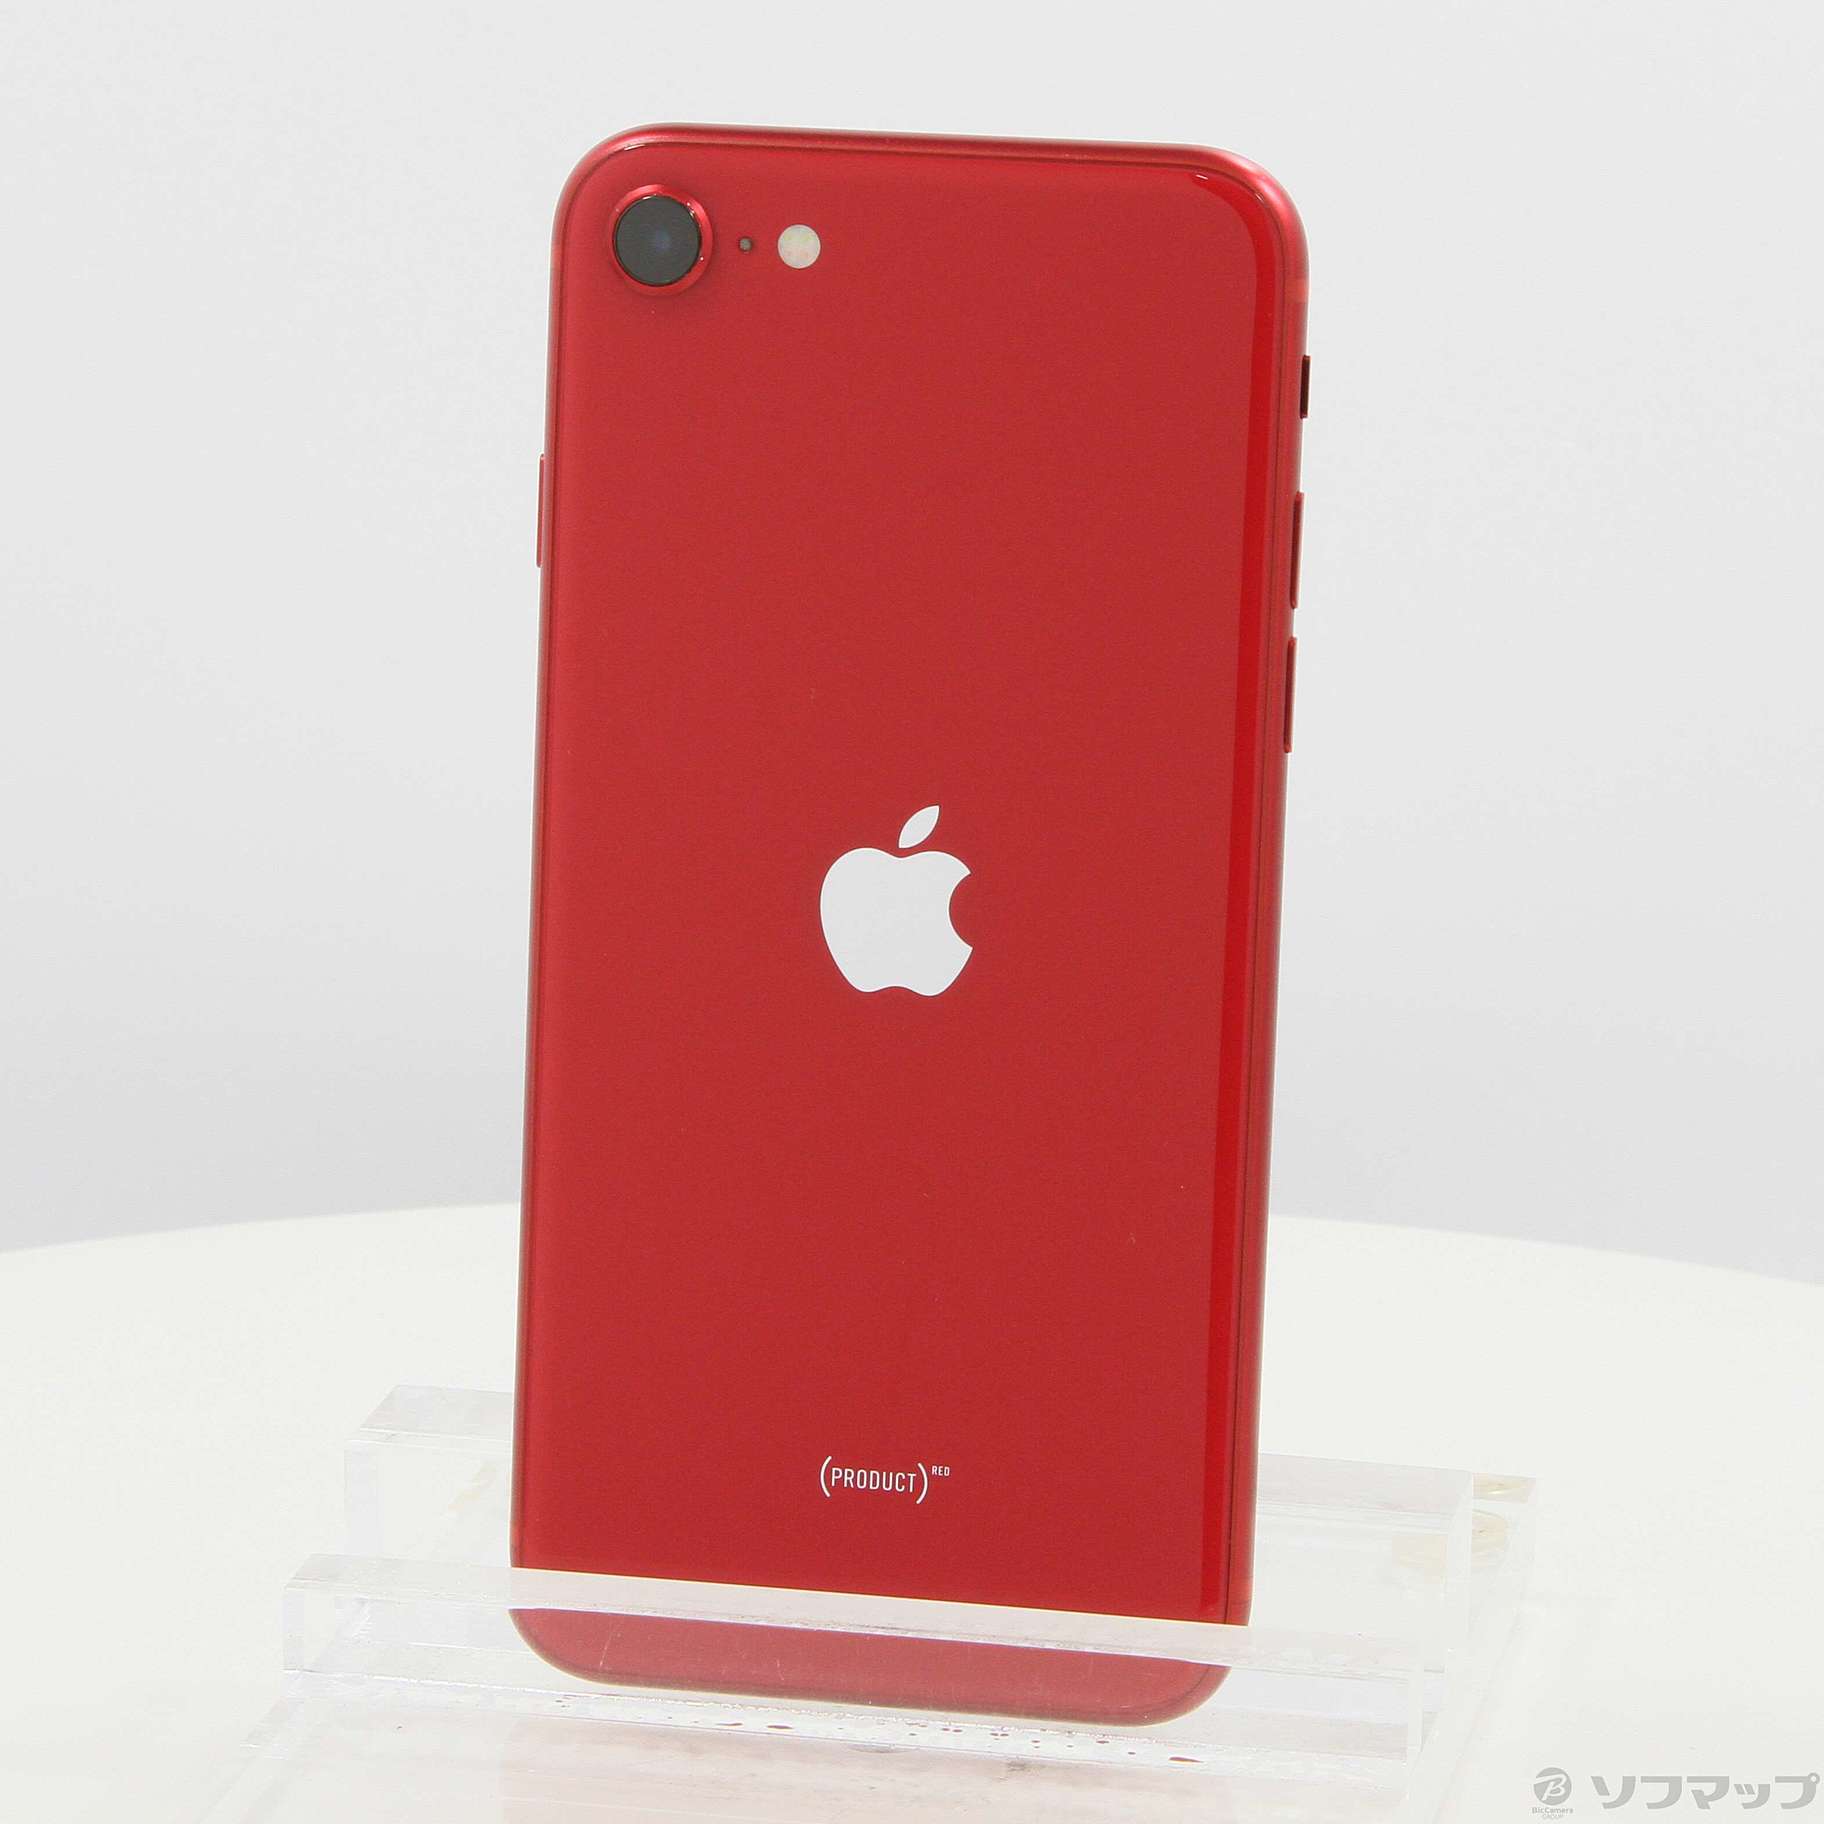 iPhone8 256GB Product RED ジャンク品